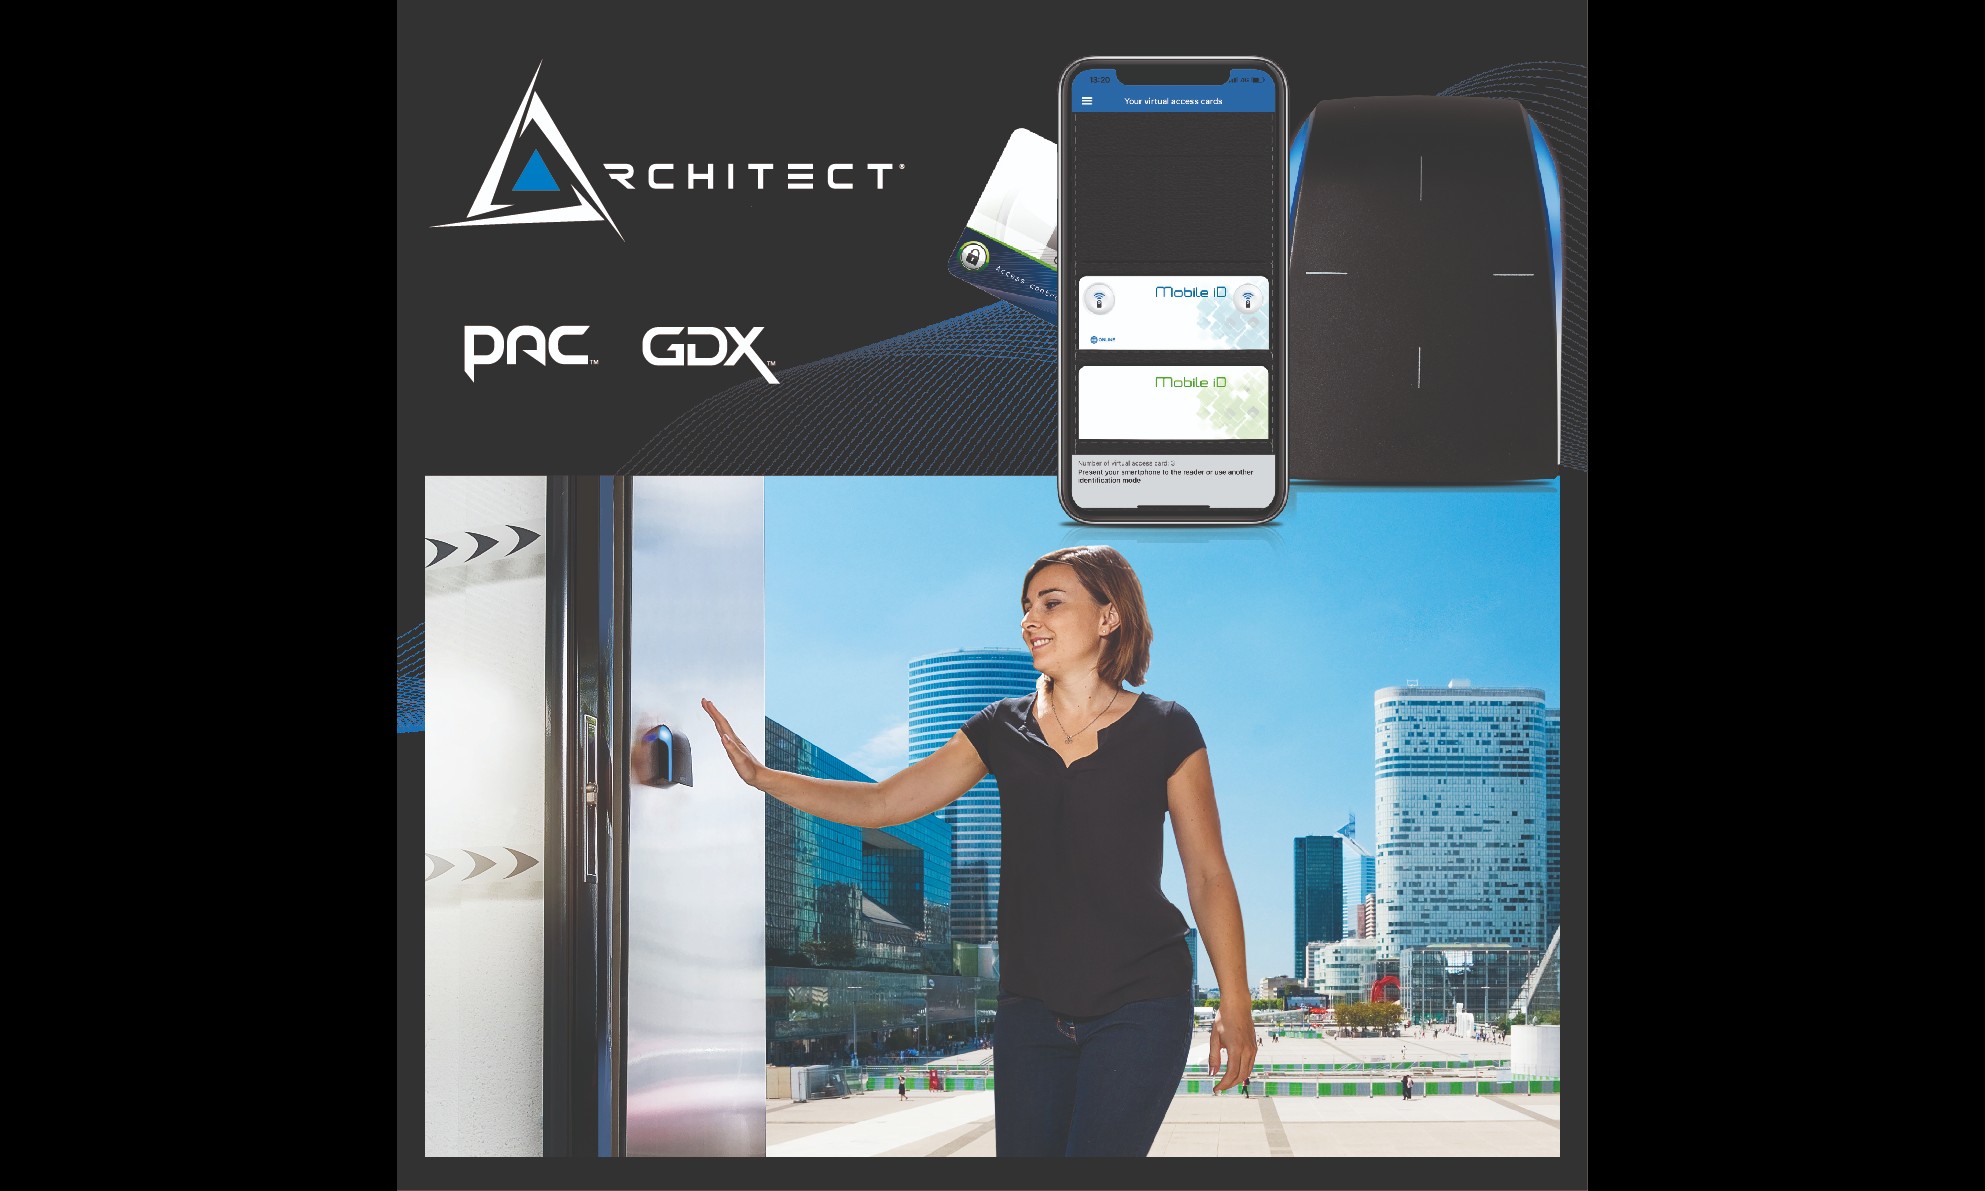 PAC & GDX demonstrates smart thinking with its new Architect range of readers